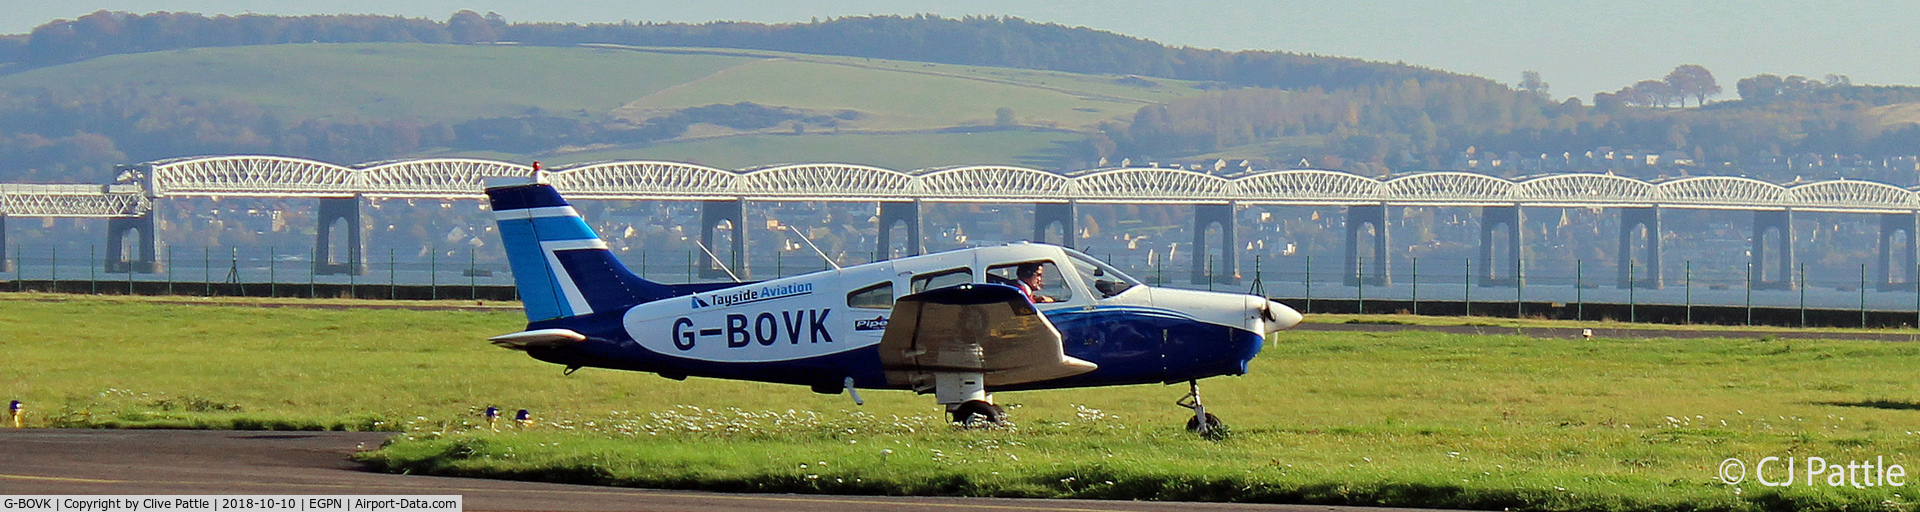 G-BOVK, 1985 Piper PA-28-161 Cherokee Warrior II C/N 28-8516061, Holding for Rwy access at Dundee